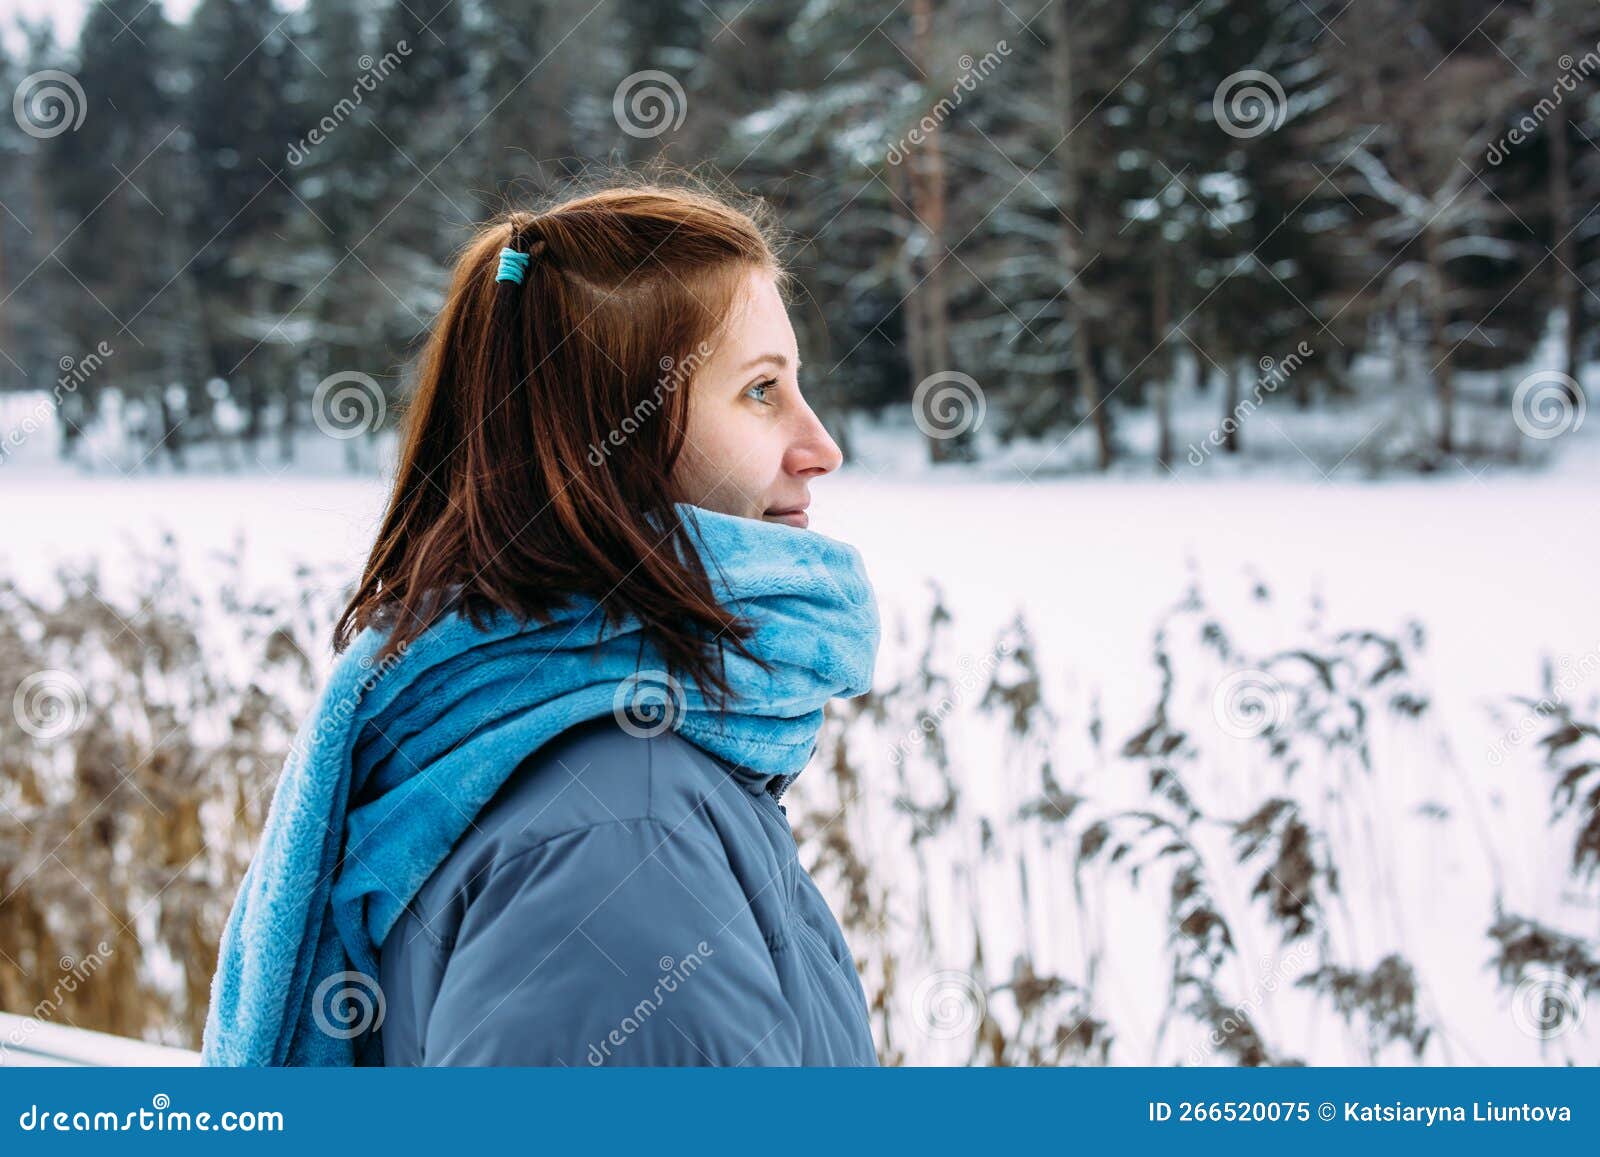 Portrait of Woman in Winter Clothes on the Nature. There is a Lot